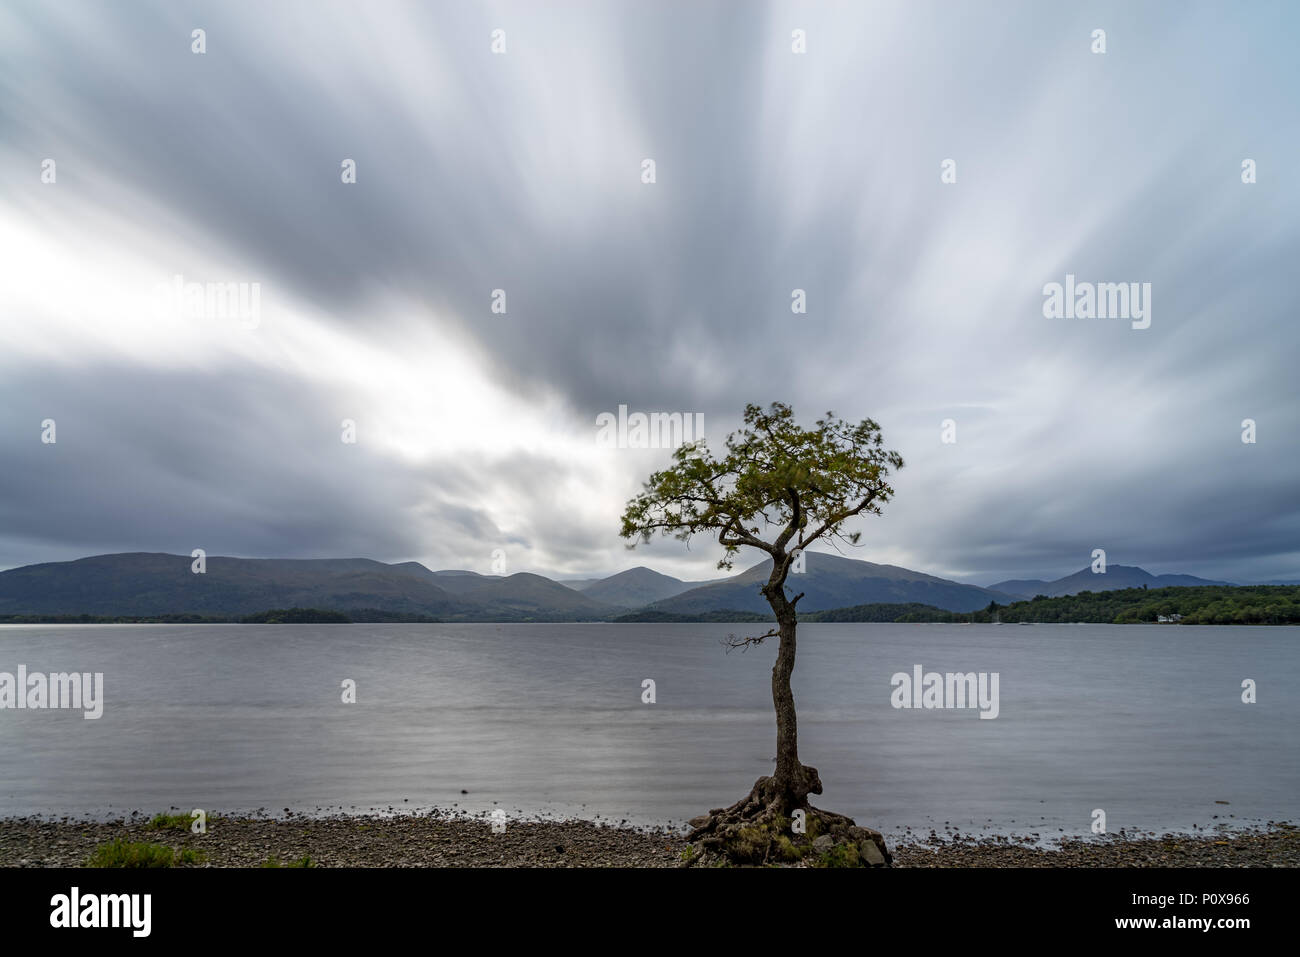 A lonley tree in the middle of the calm waters of milarrochy bay loch lomond scotland Stock Photo